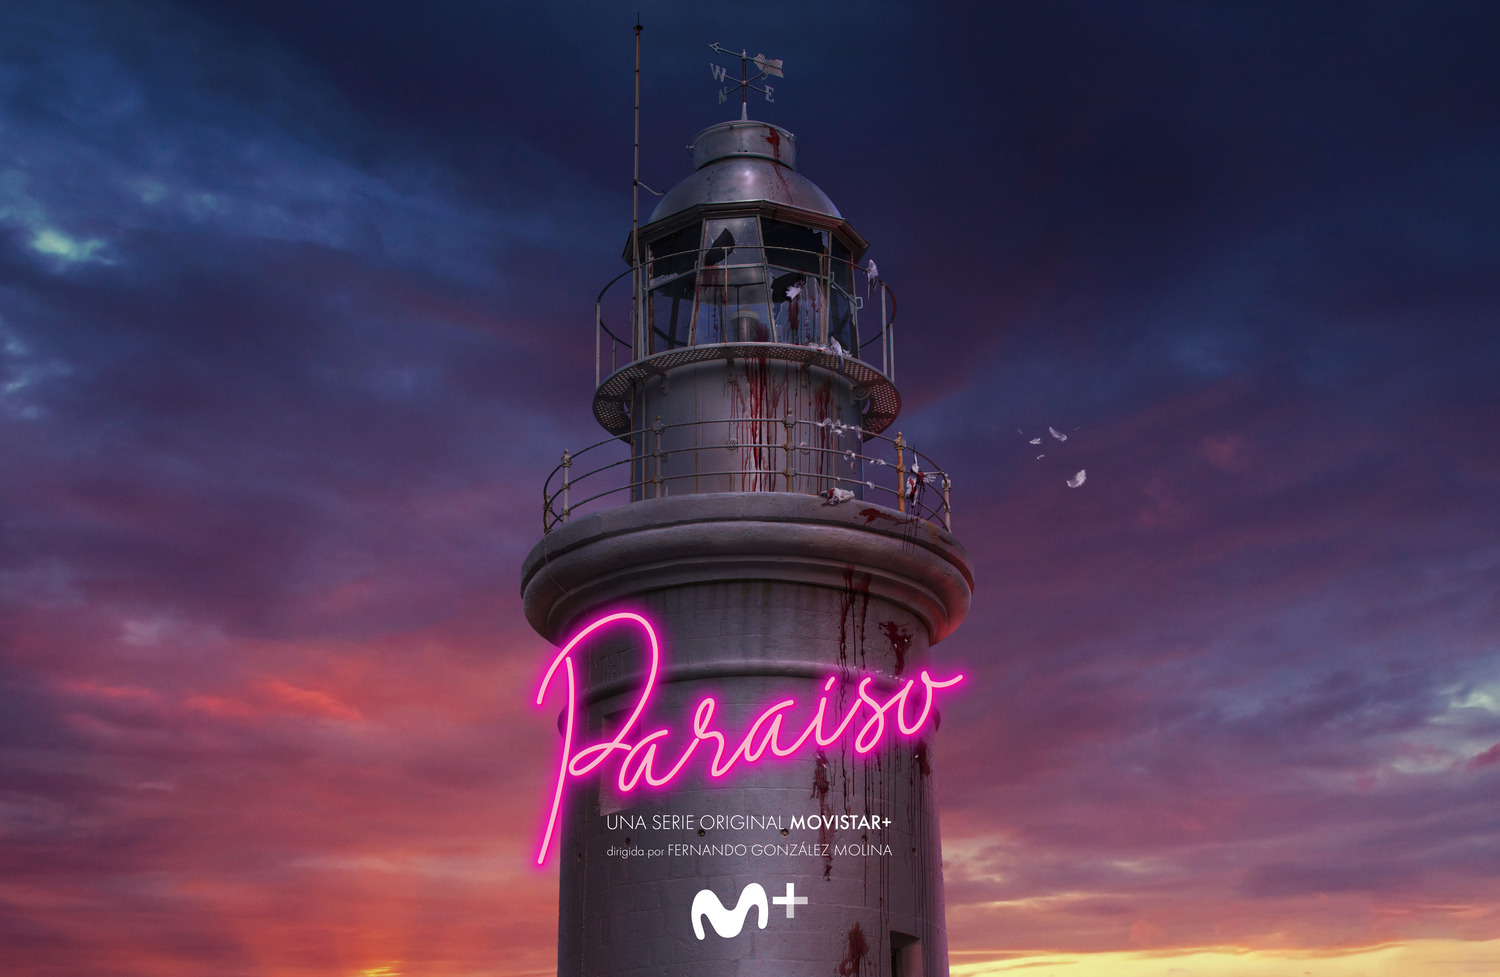 Extra Large TV Poster Image for Paraíso (#7 of 23)